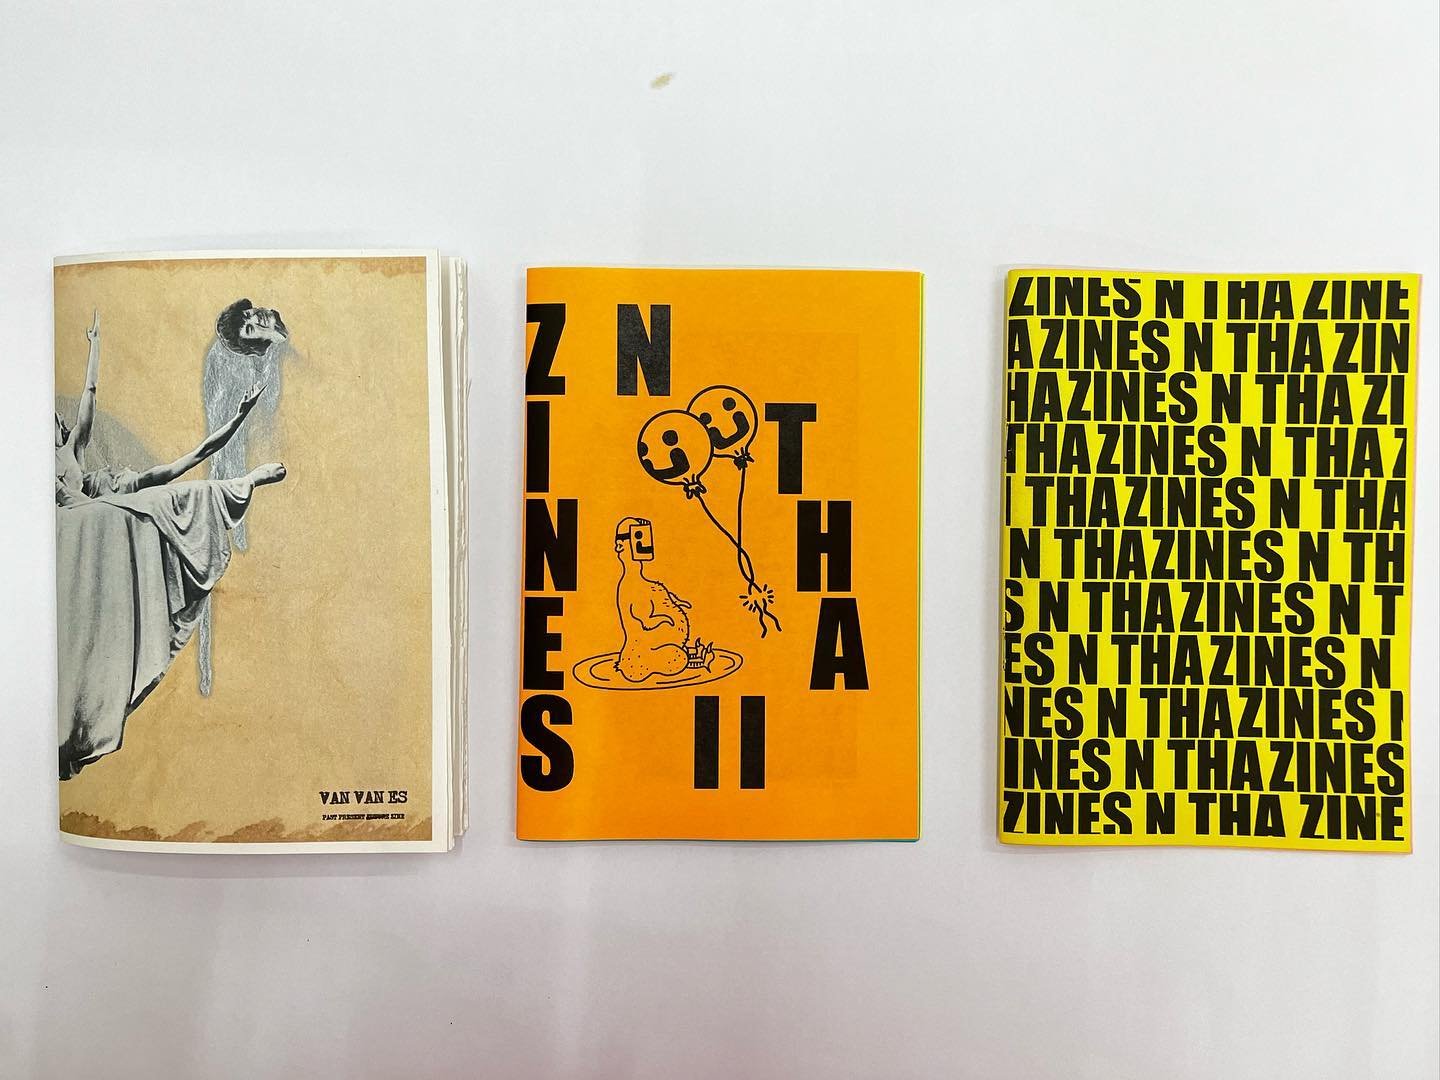 Thrilled to announce that PRINTS N THA PRESS is finally here!!! 
We&rsquo;ve combined our love for artist books and supporting emerging Liverpool artists to launch PNT PRESS to document and promote local artists &amp; illustrators work. So watch this